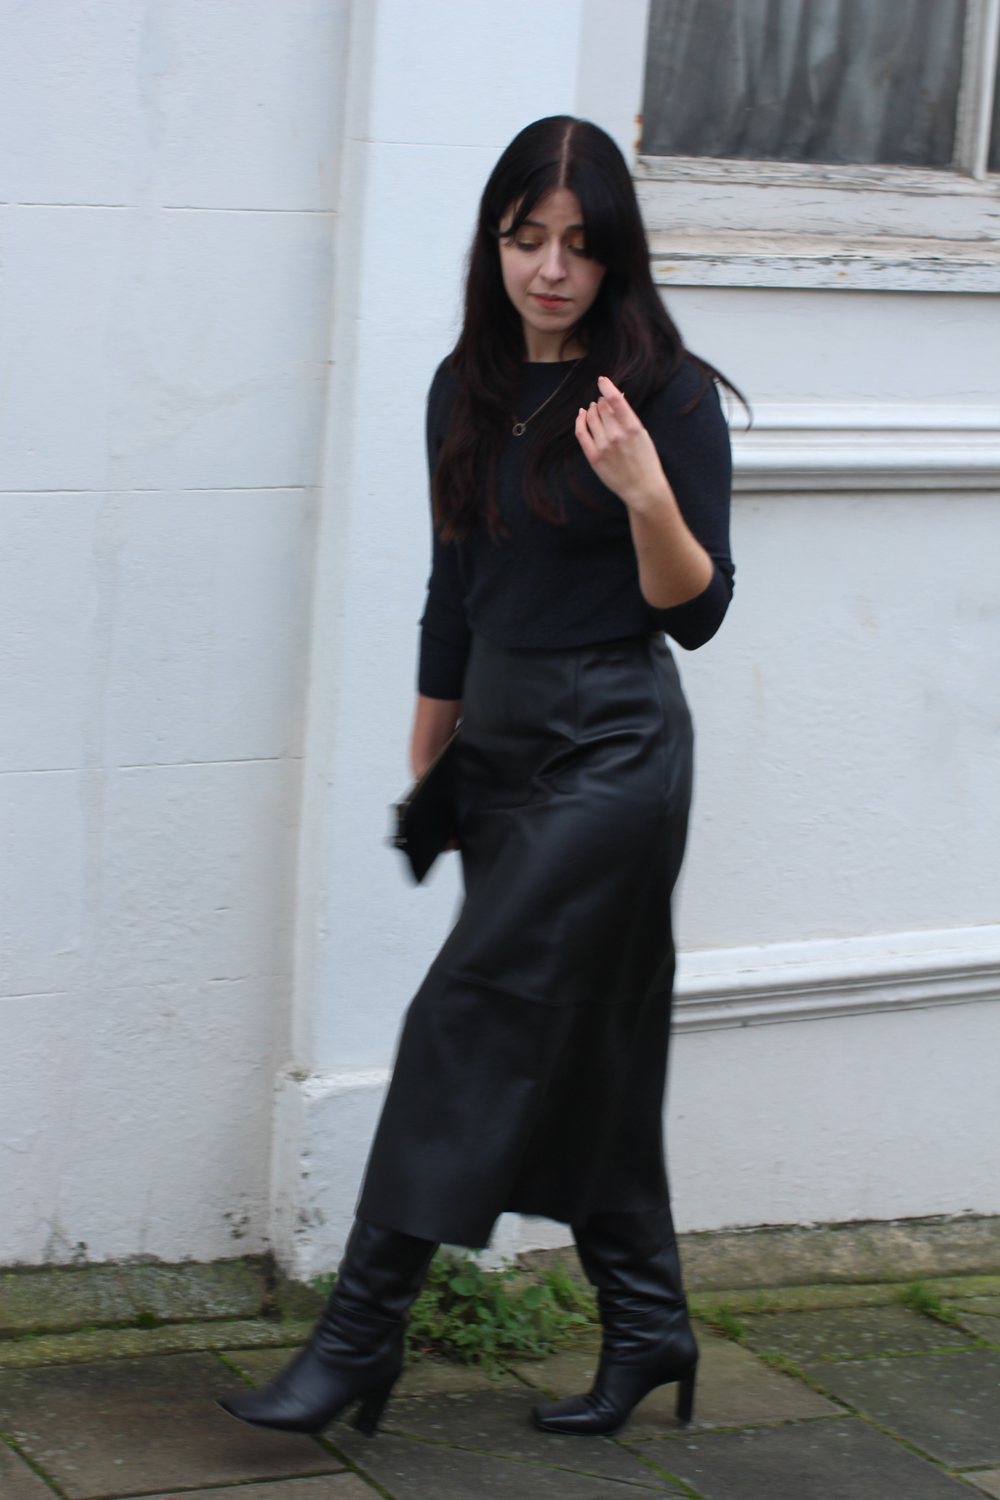 Full outfit shot of black sparkle top, black leather midi skirt, black boots